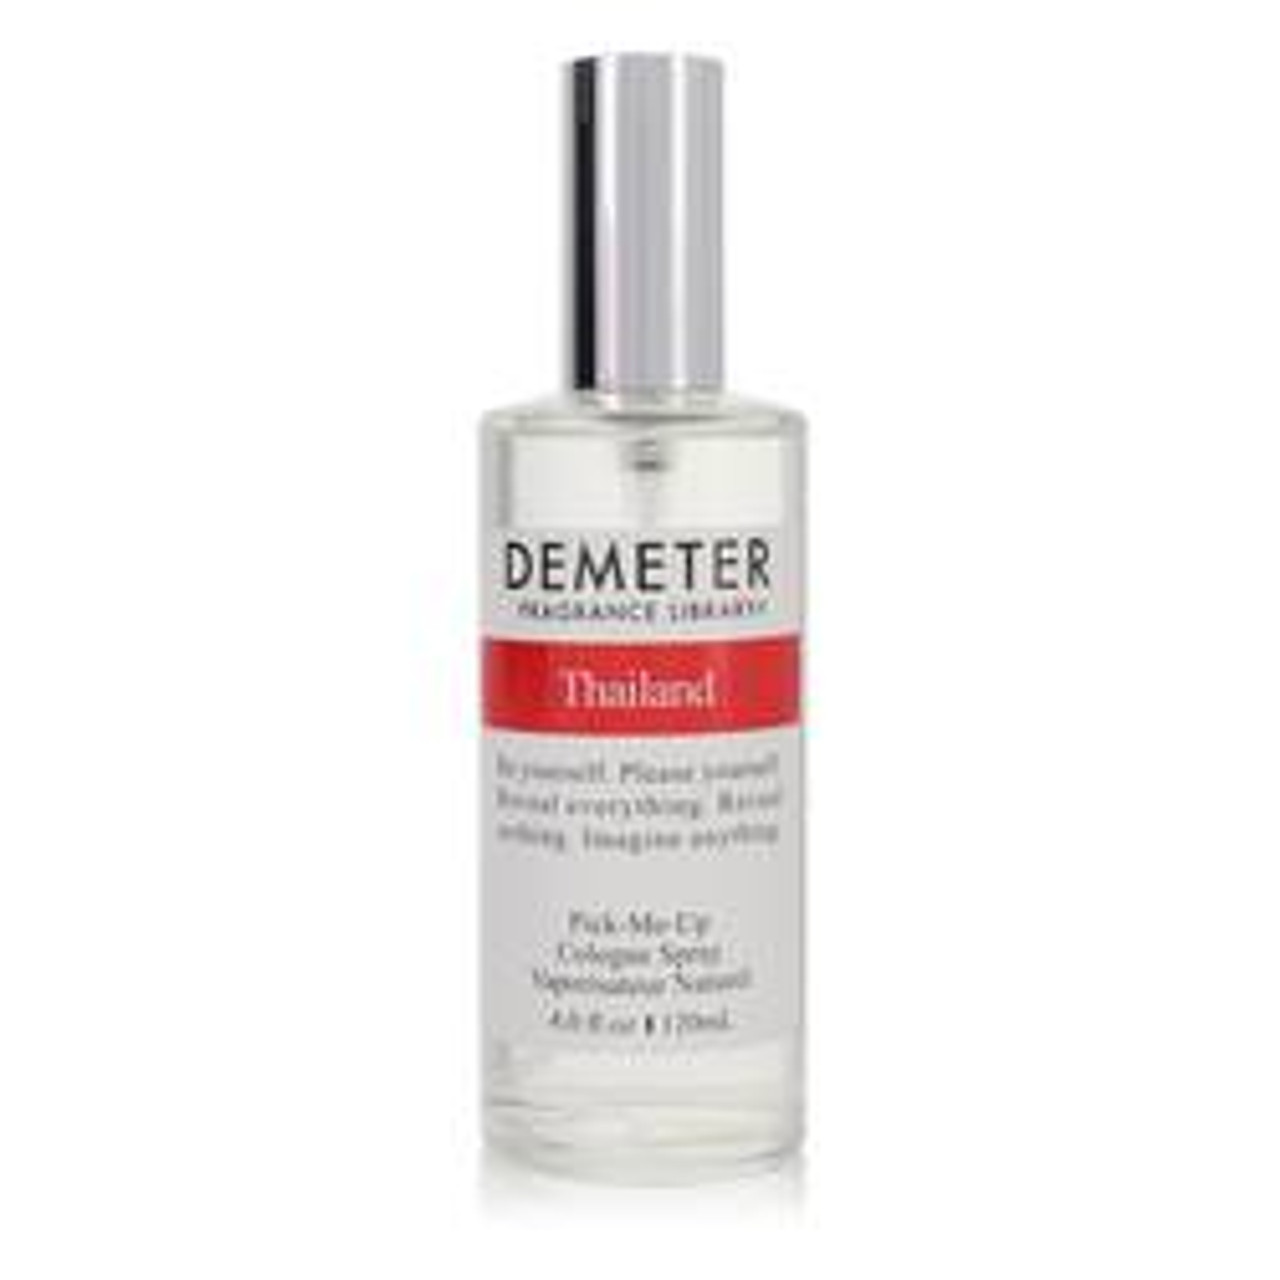 Demeter Thailand Perfume By Demeter Cologne Spray (Unboxed) 4 oz for Women - [From 63.00 - Choose pk Qty ] - *Ships from Miami